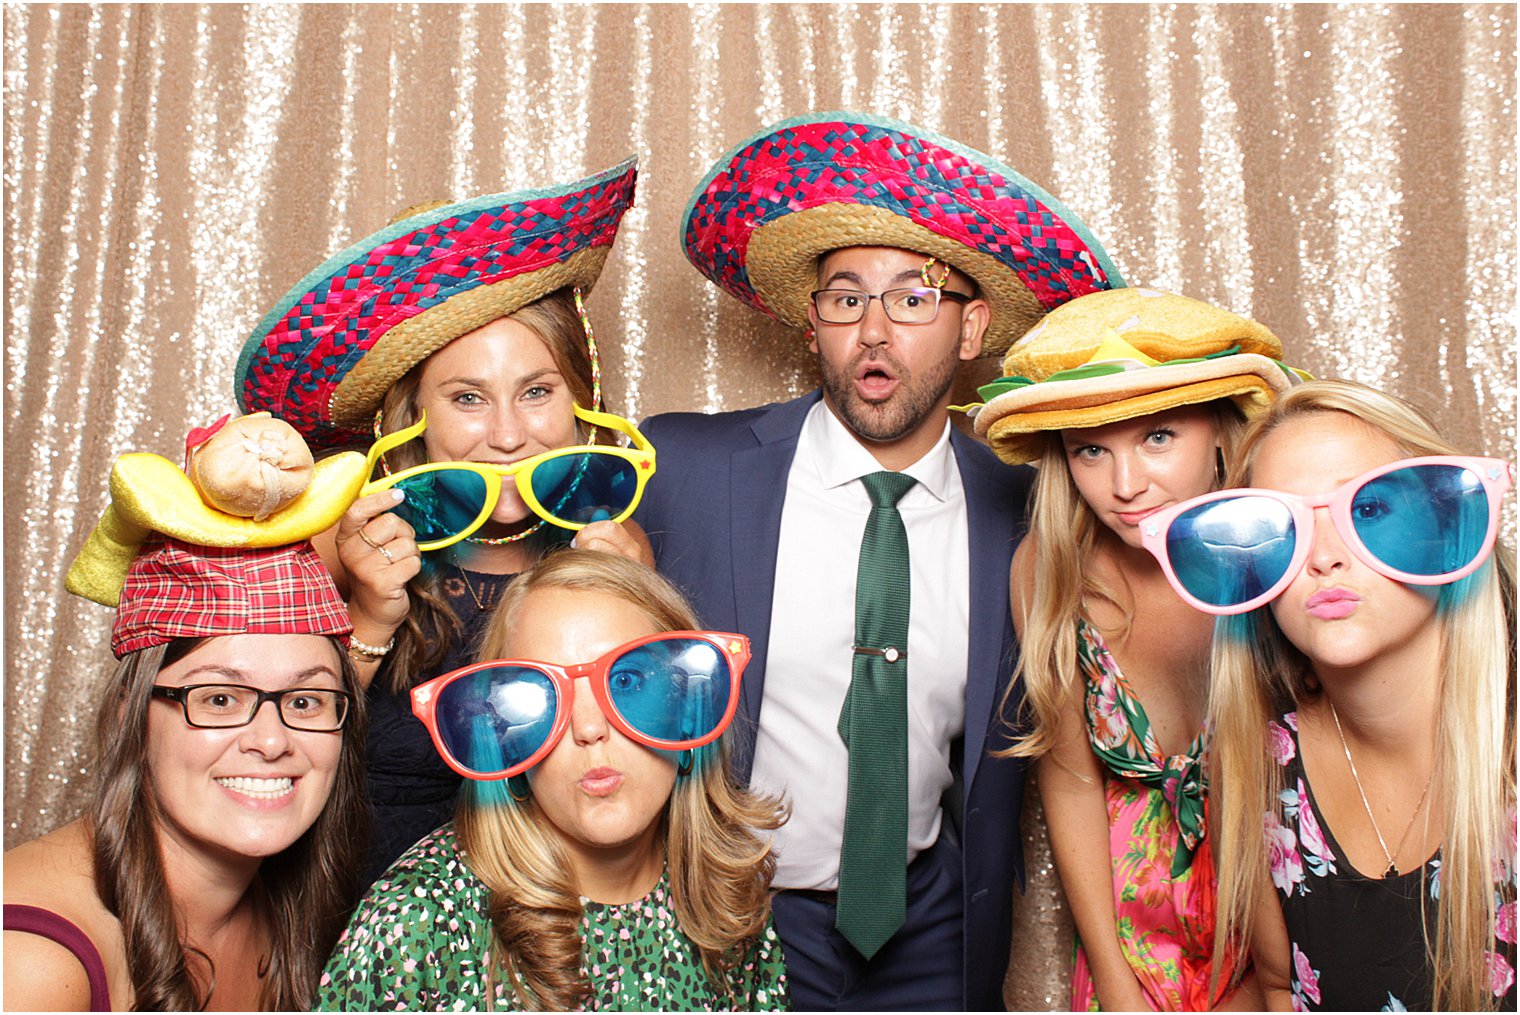 guests in sombreros and sunglasses during NJ wedding reception photo booth